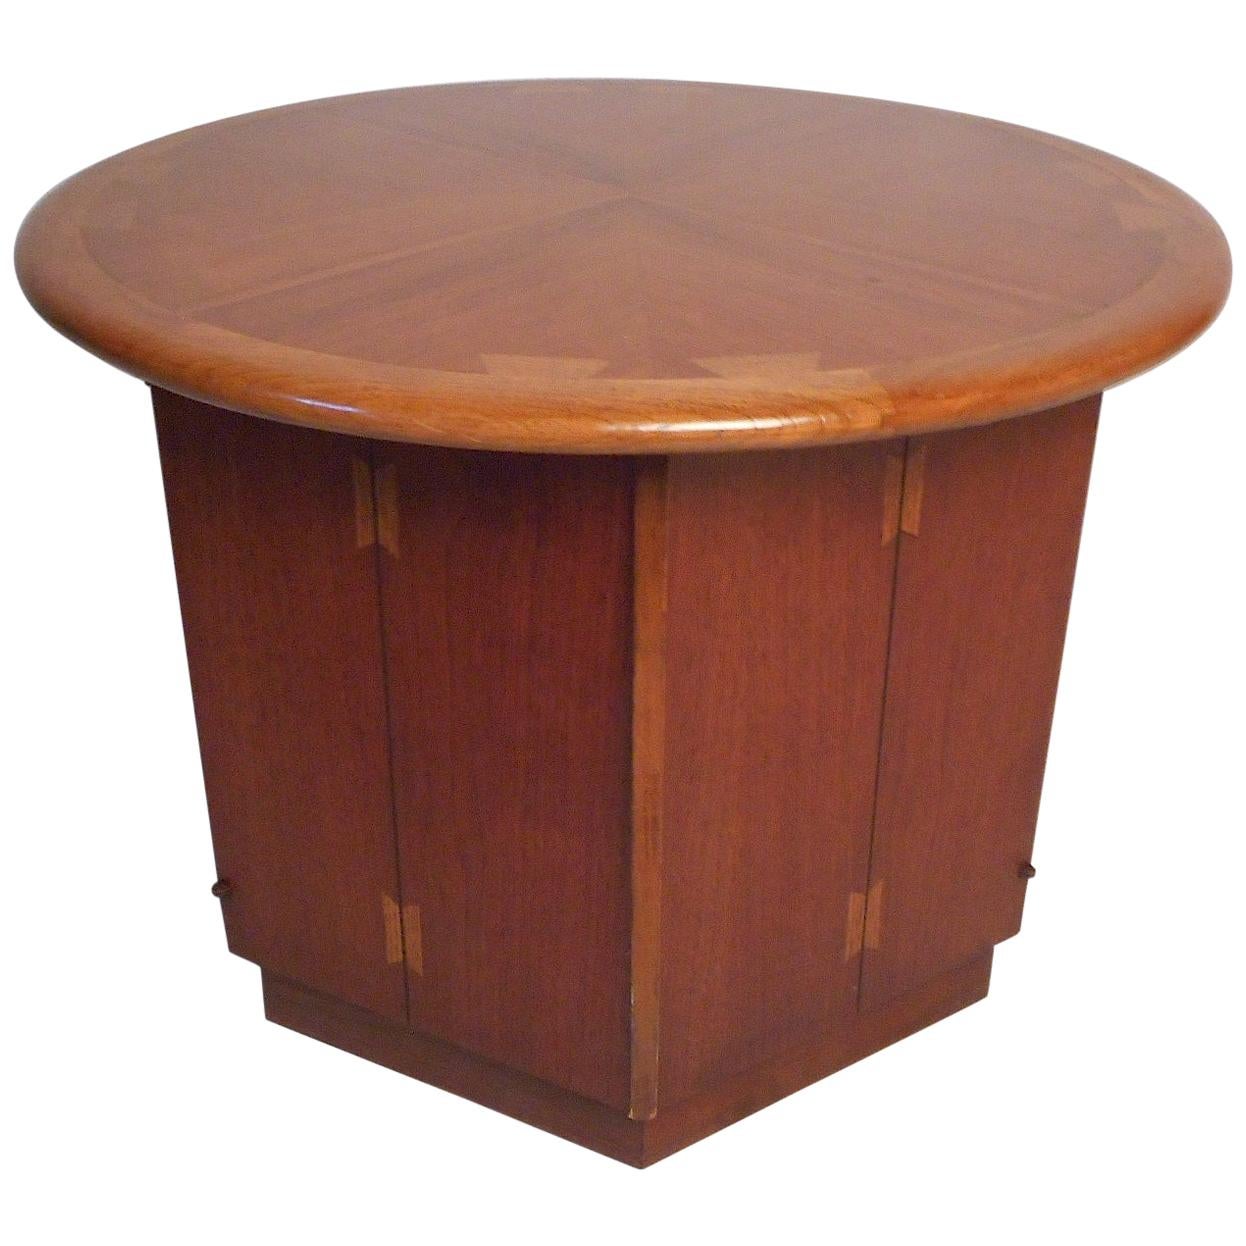 Mid-Century Modern End Table by Lane Furniture